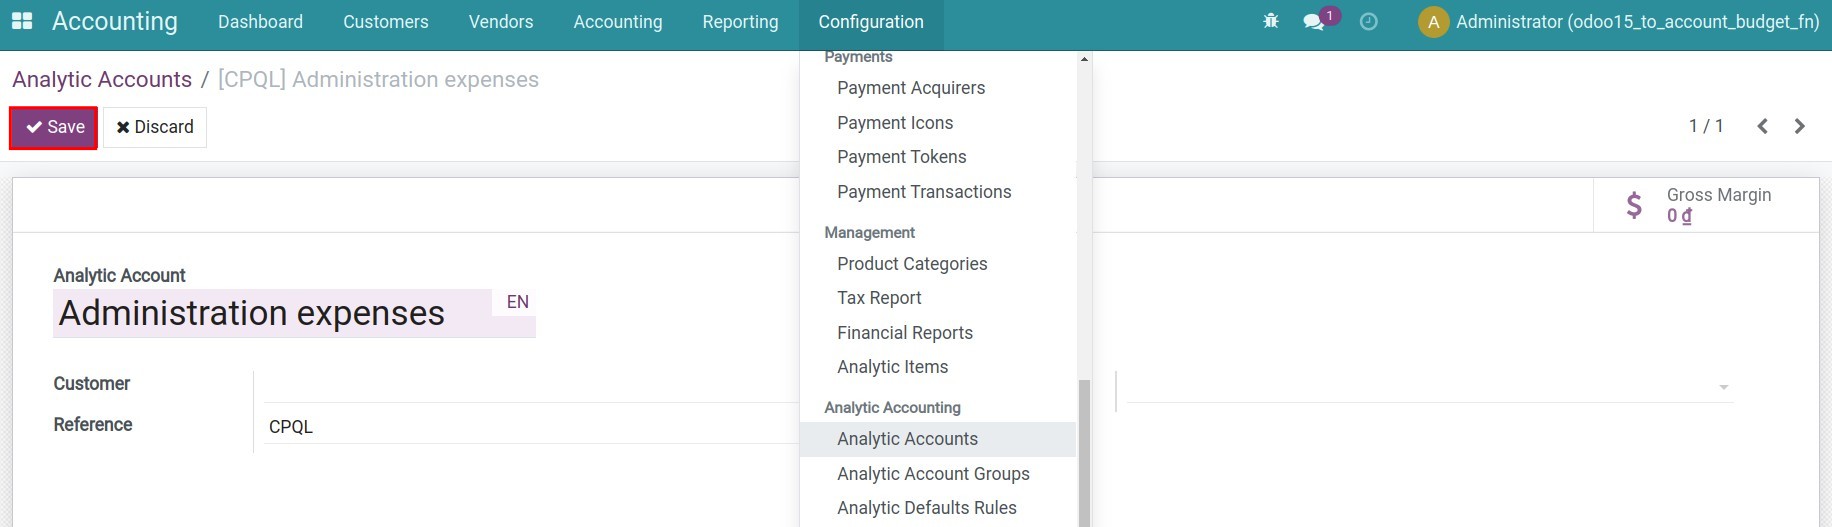 Create a new analytic account in Viindoo Accounting